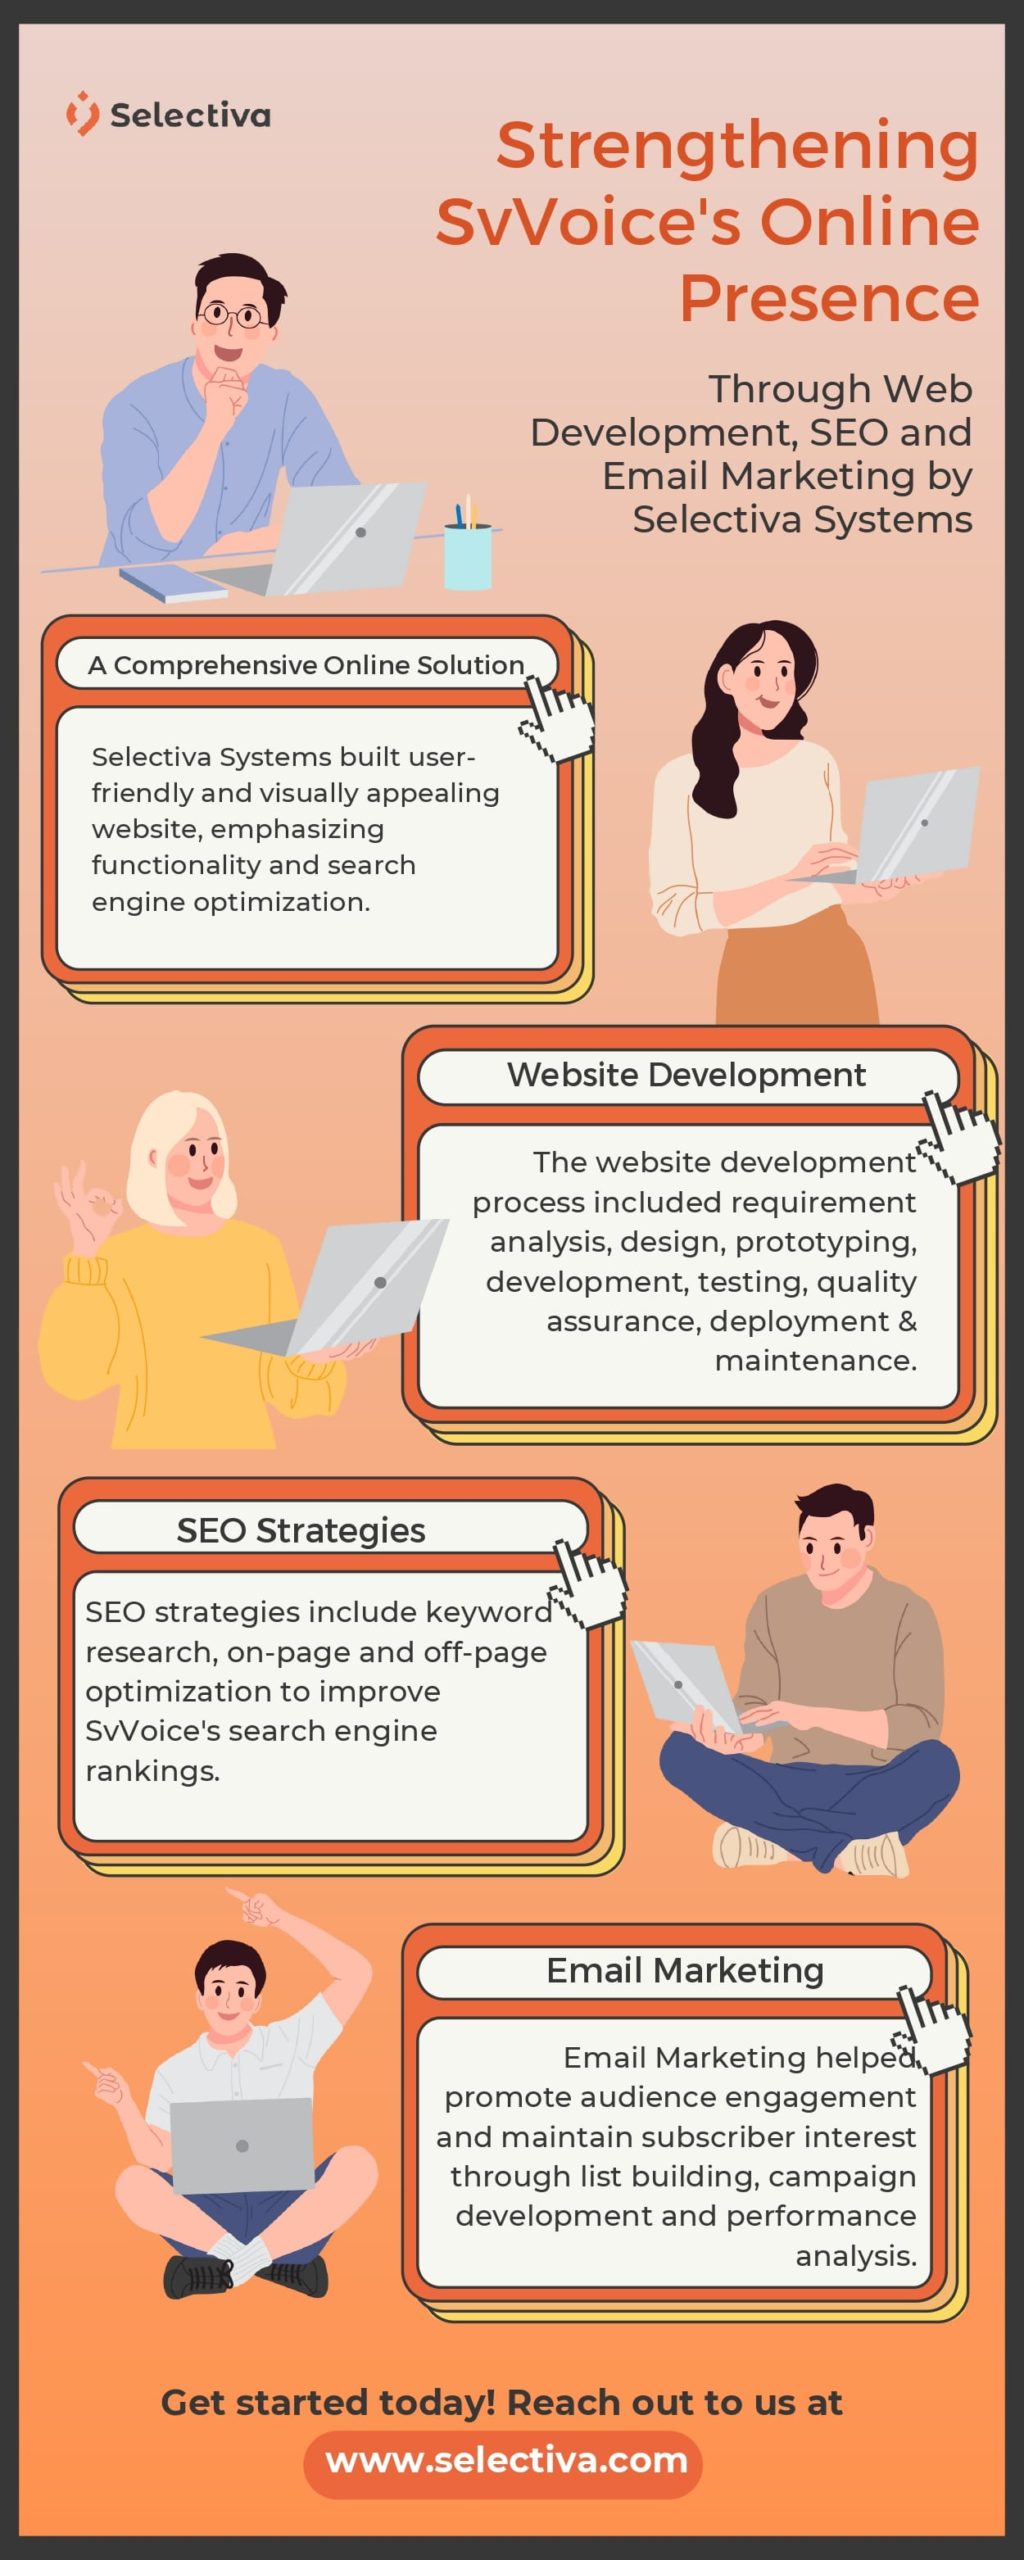 Strengthening Online presence through Web Development, SEO and Email Marketing_Image.